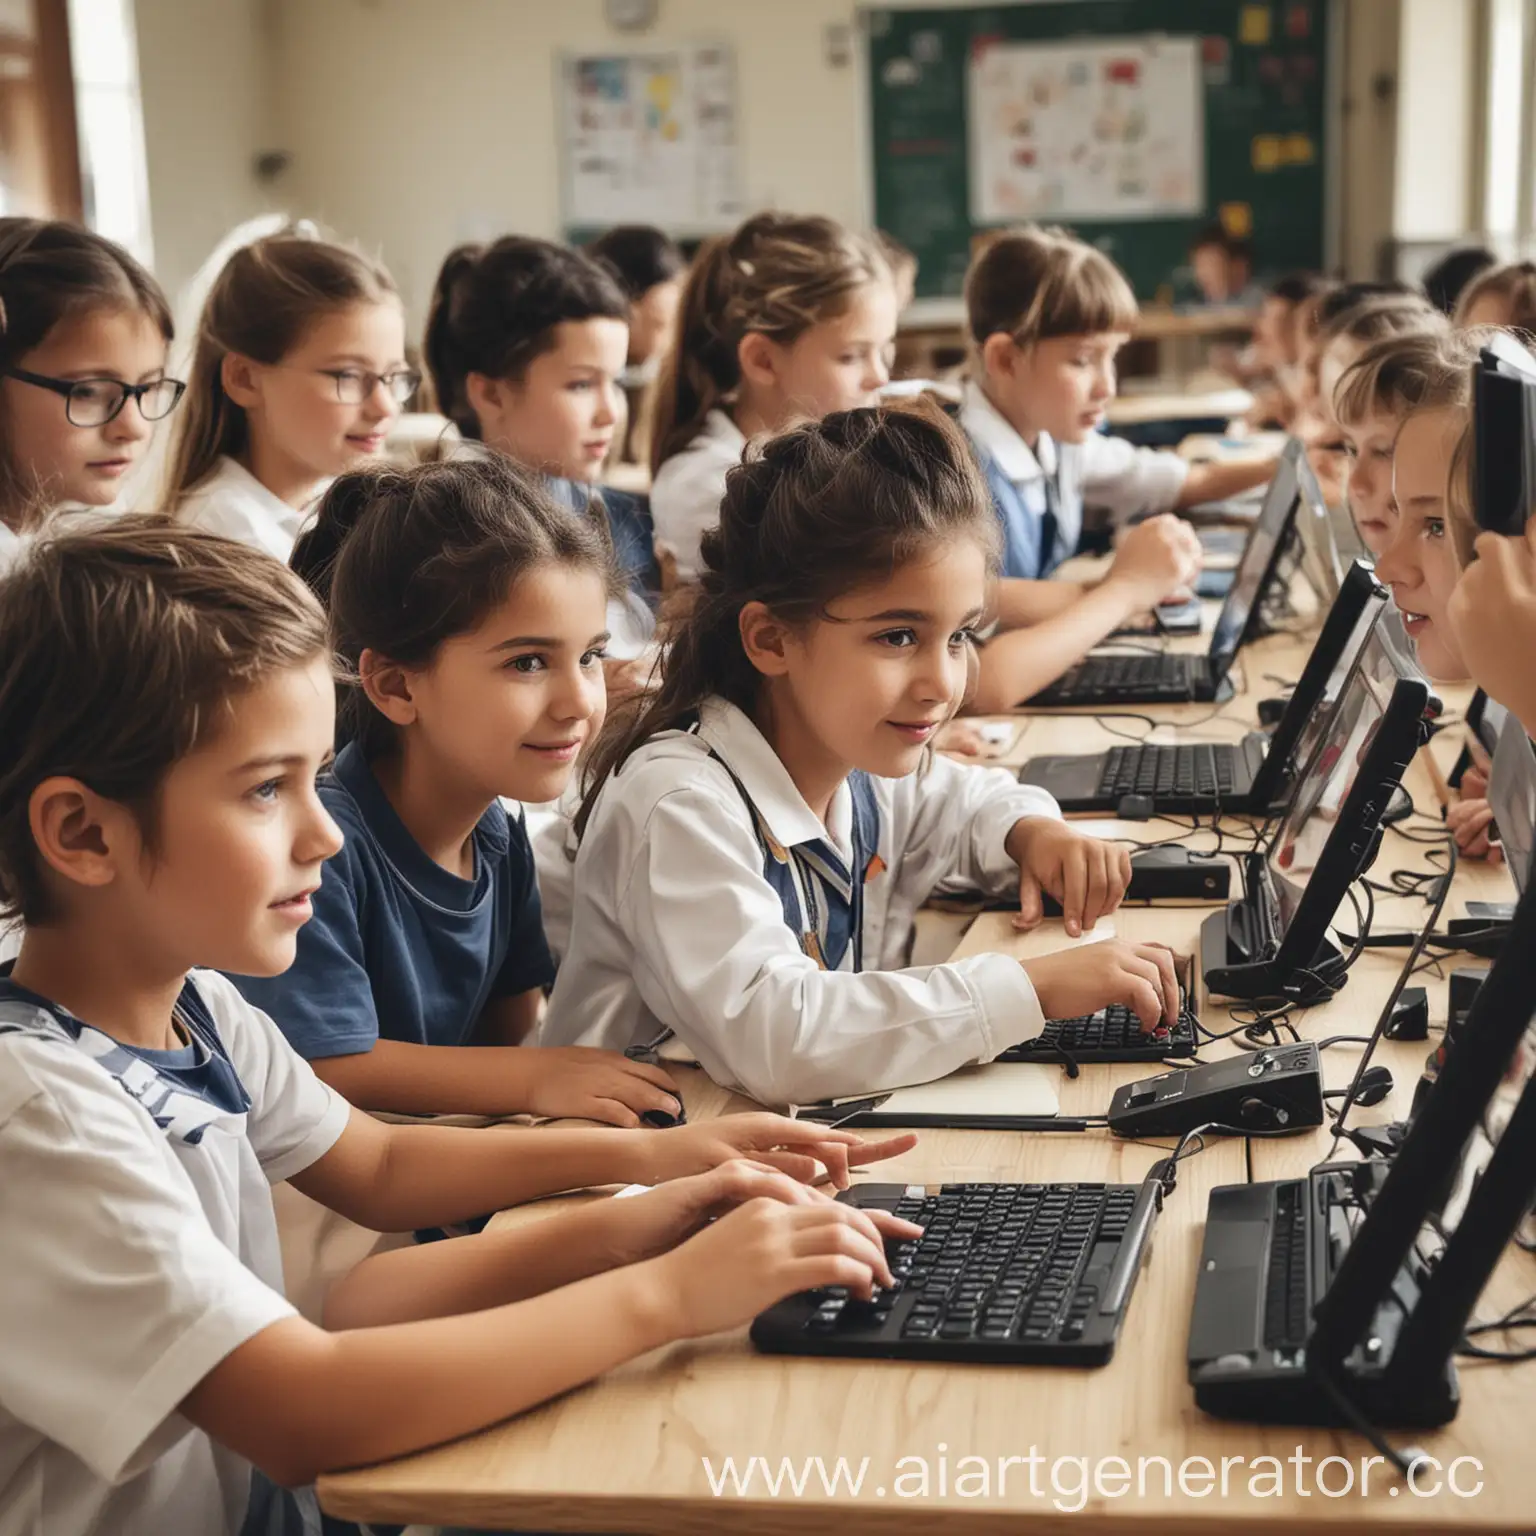 Impacts-of-Technology-on-School-Education-Benefits-and-Drawbacks